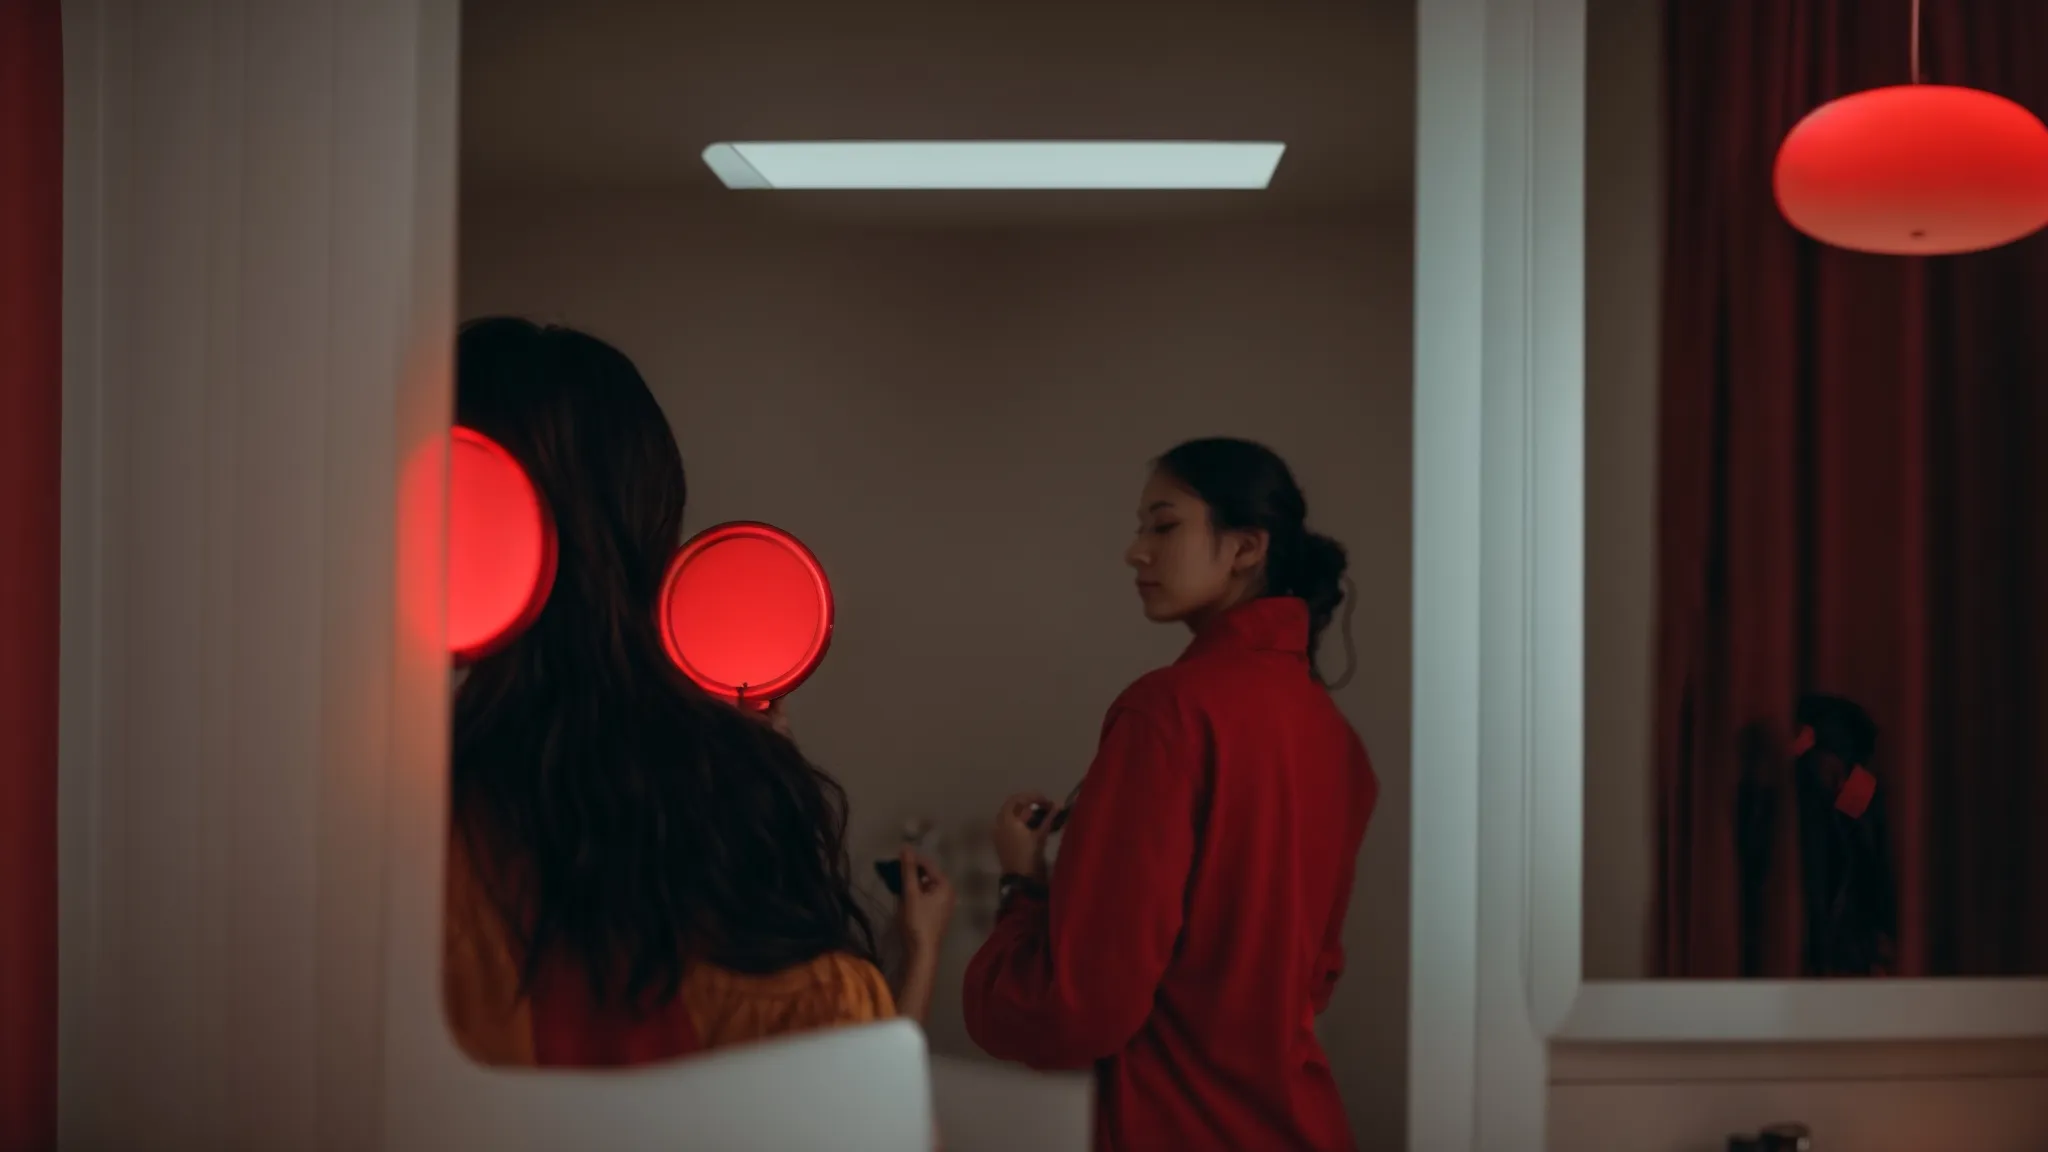 a person stands in front of a mirror, holding a red light therapy device close to their face, bathed in a soothing glow.